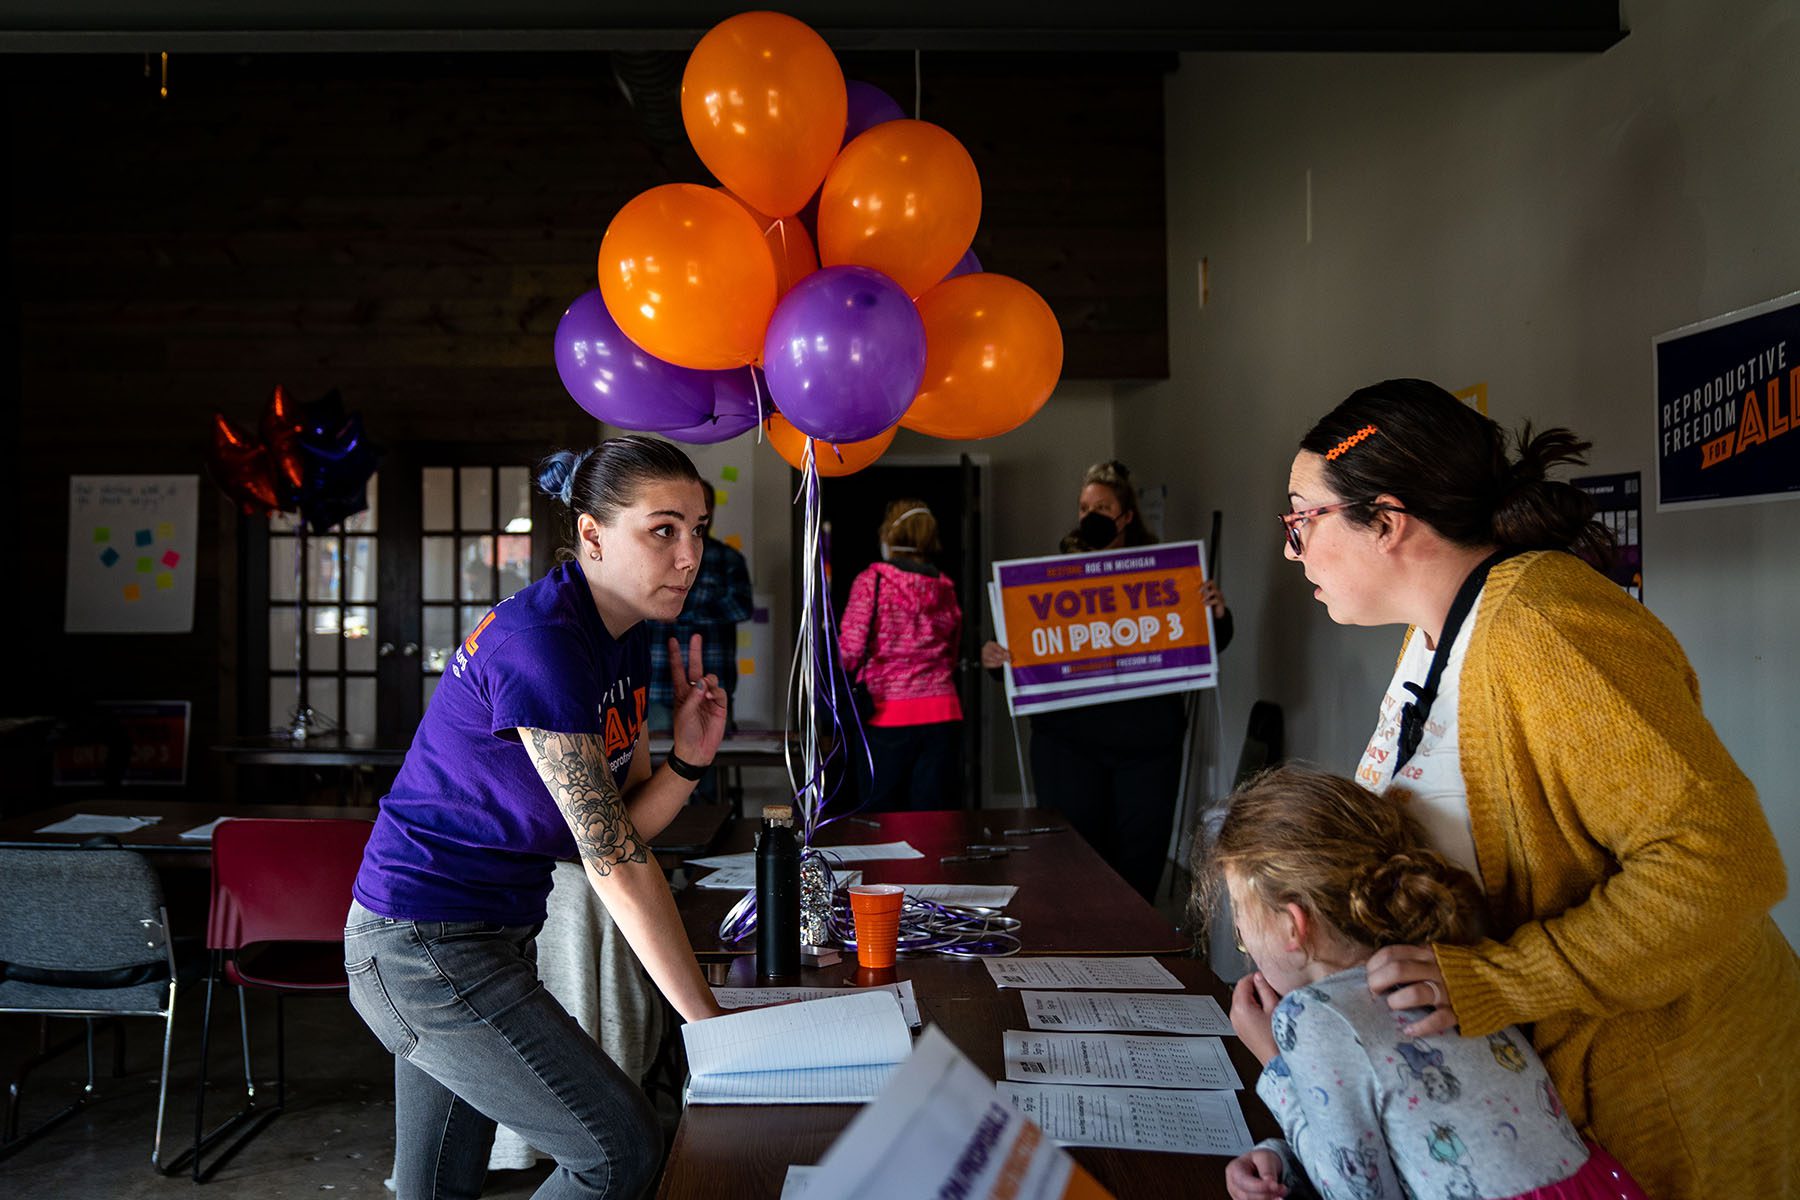 An organizer helps a volunteer sign up and pick up yard signs at a Reproductive Freedom for All campaign office. Purple and orange balloons decorate a table and "vote yes on prop 3" yard signs are seen in the. background.